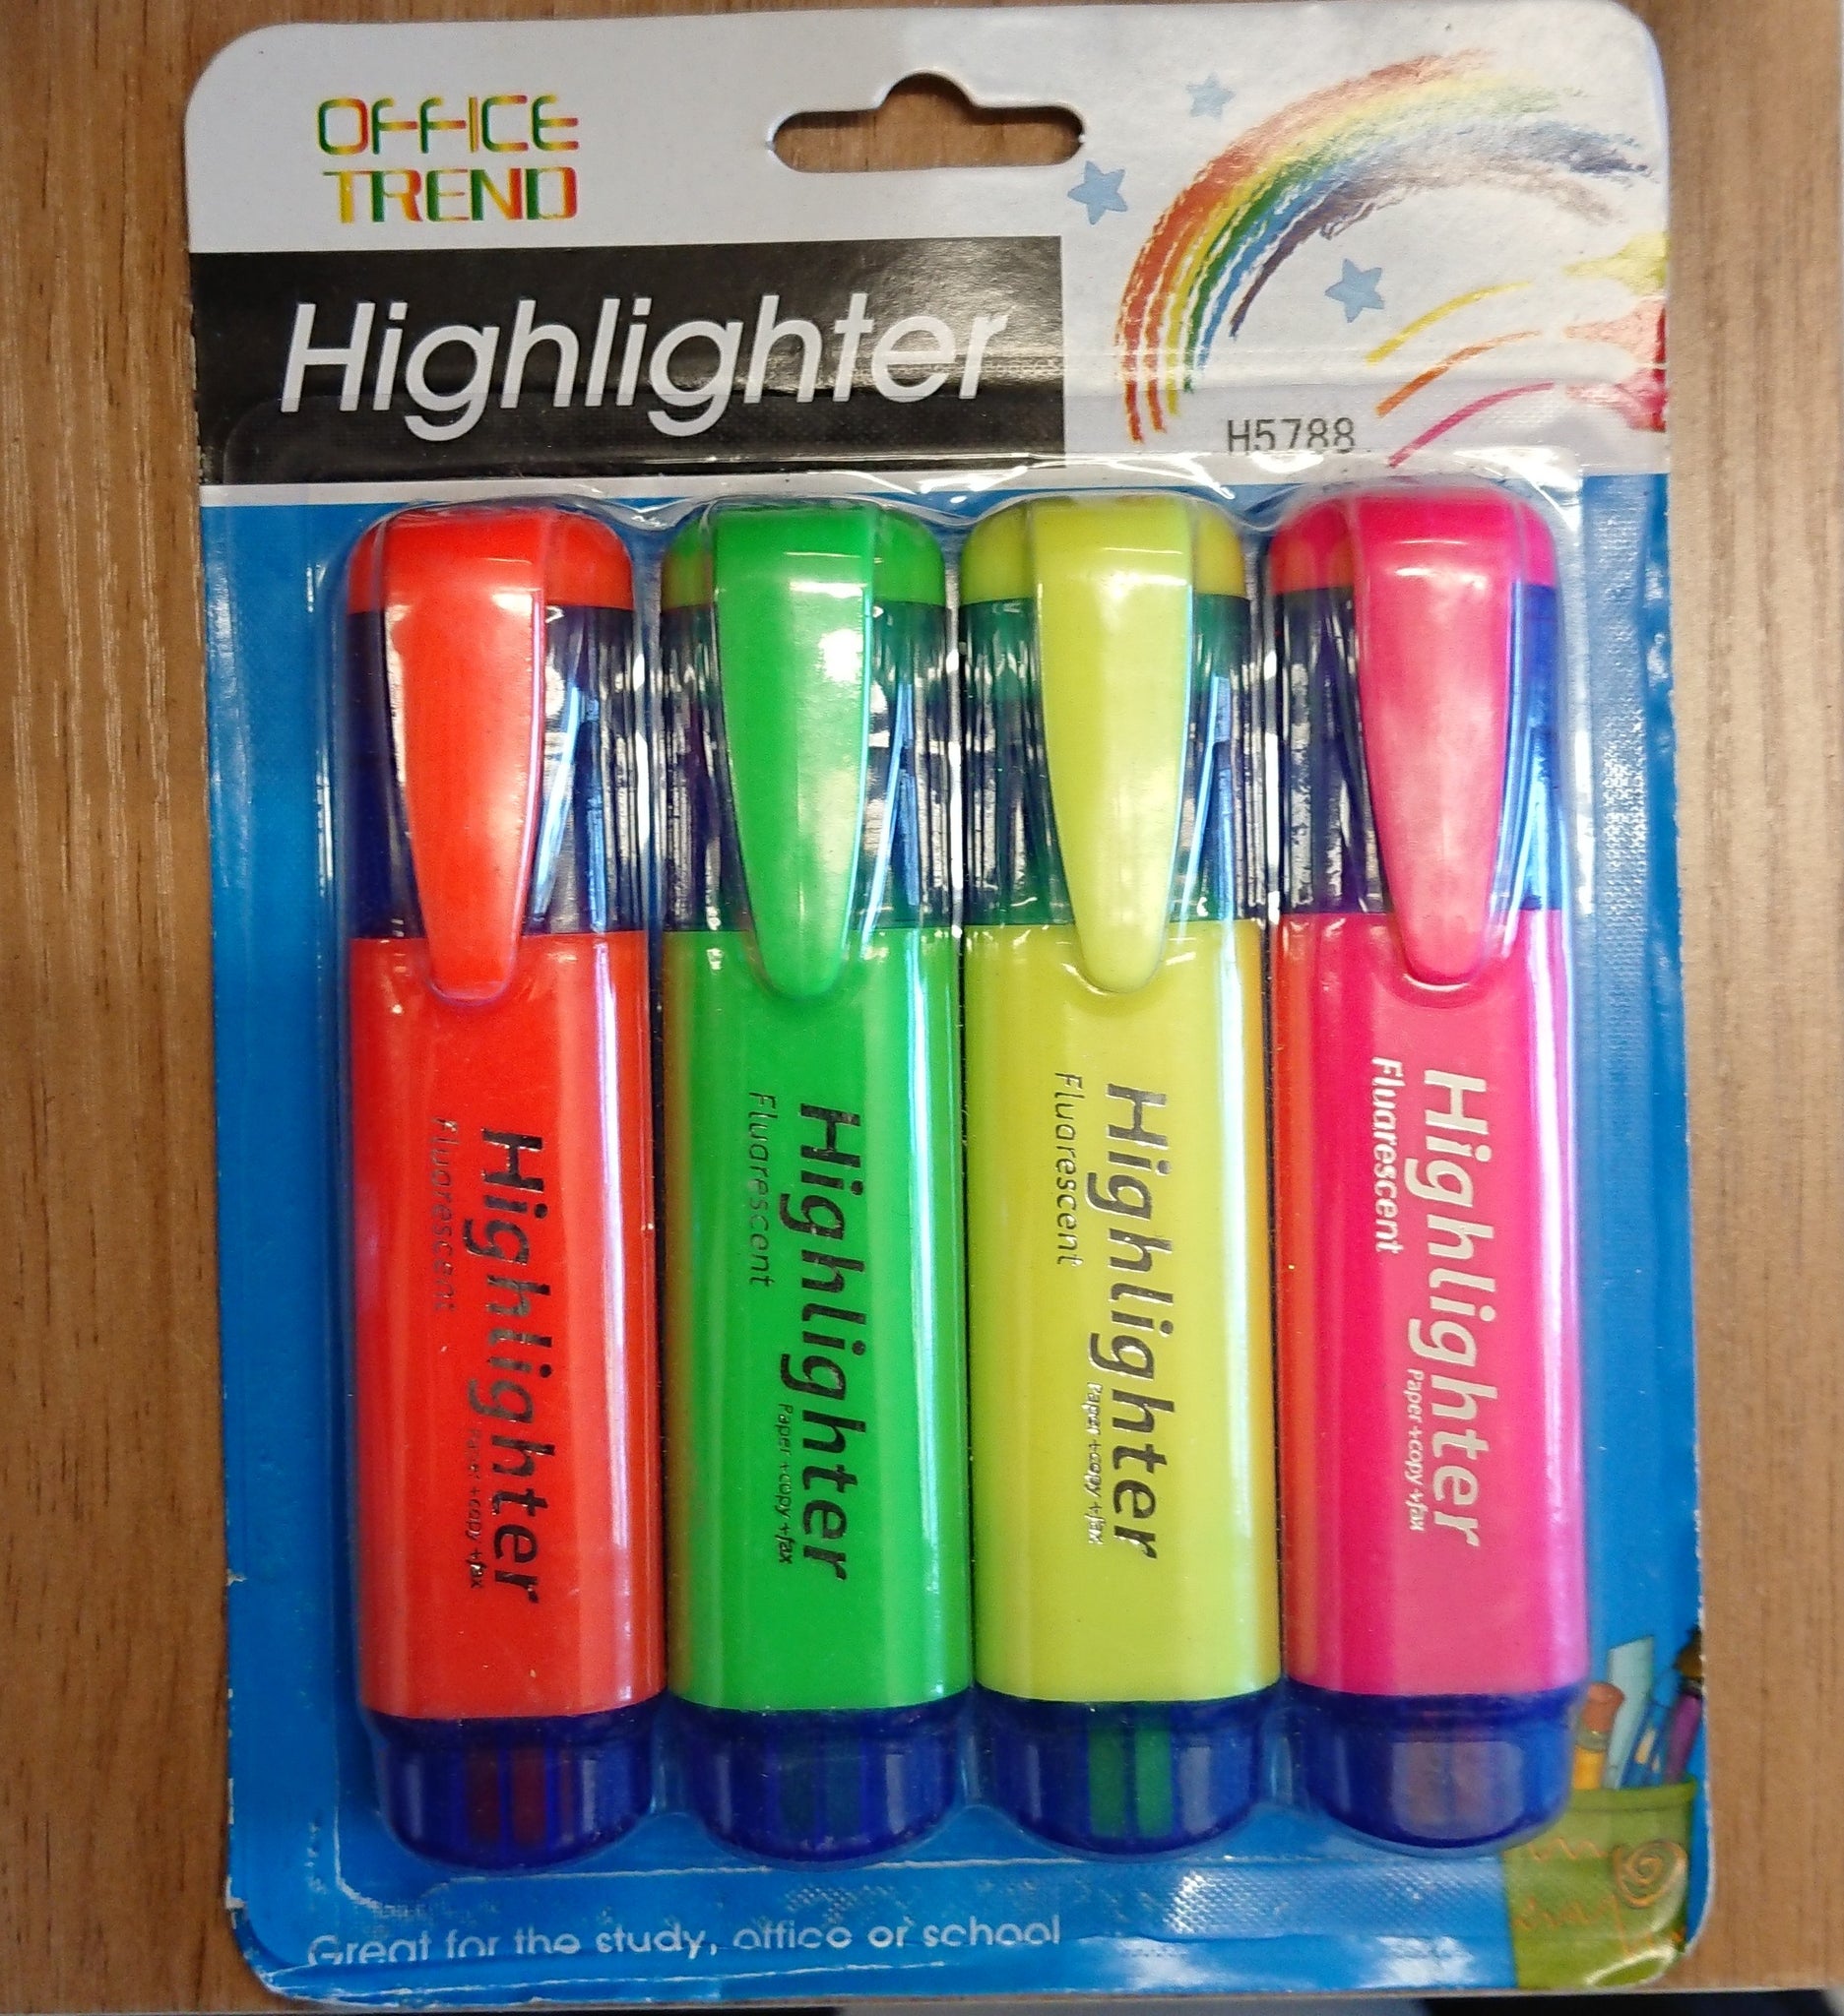 OFFICE TREND HIGHLIGHTER 4 PACK – Adam's Pharmaceutical Services